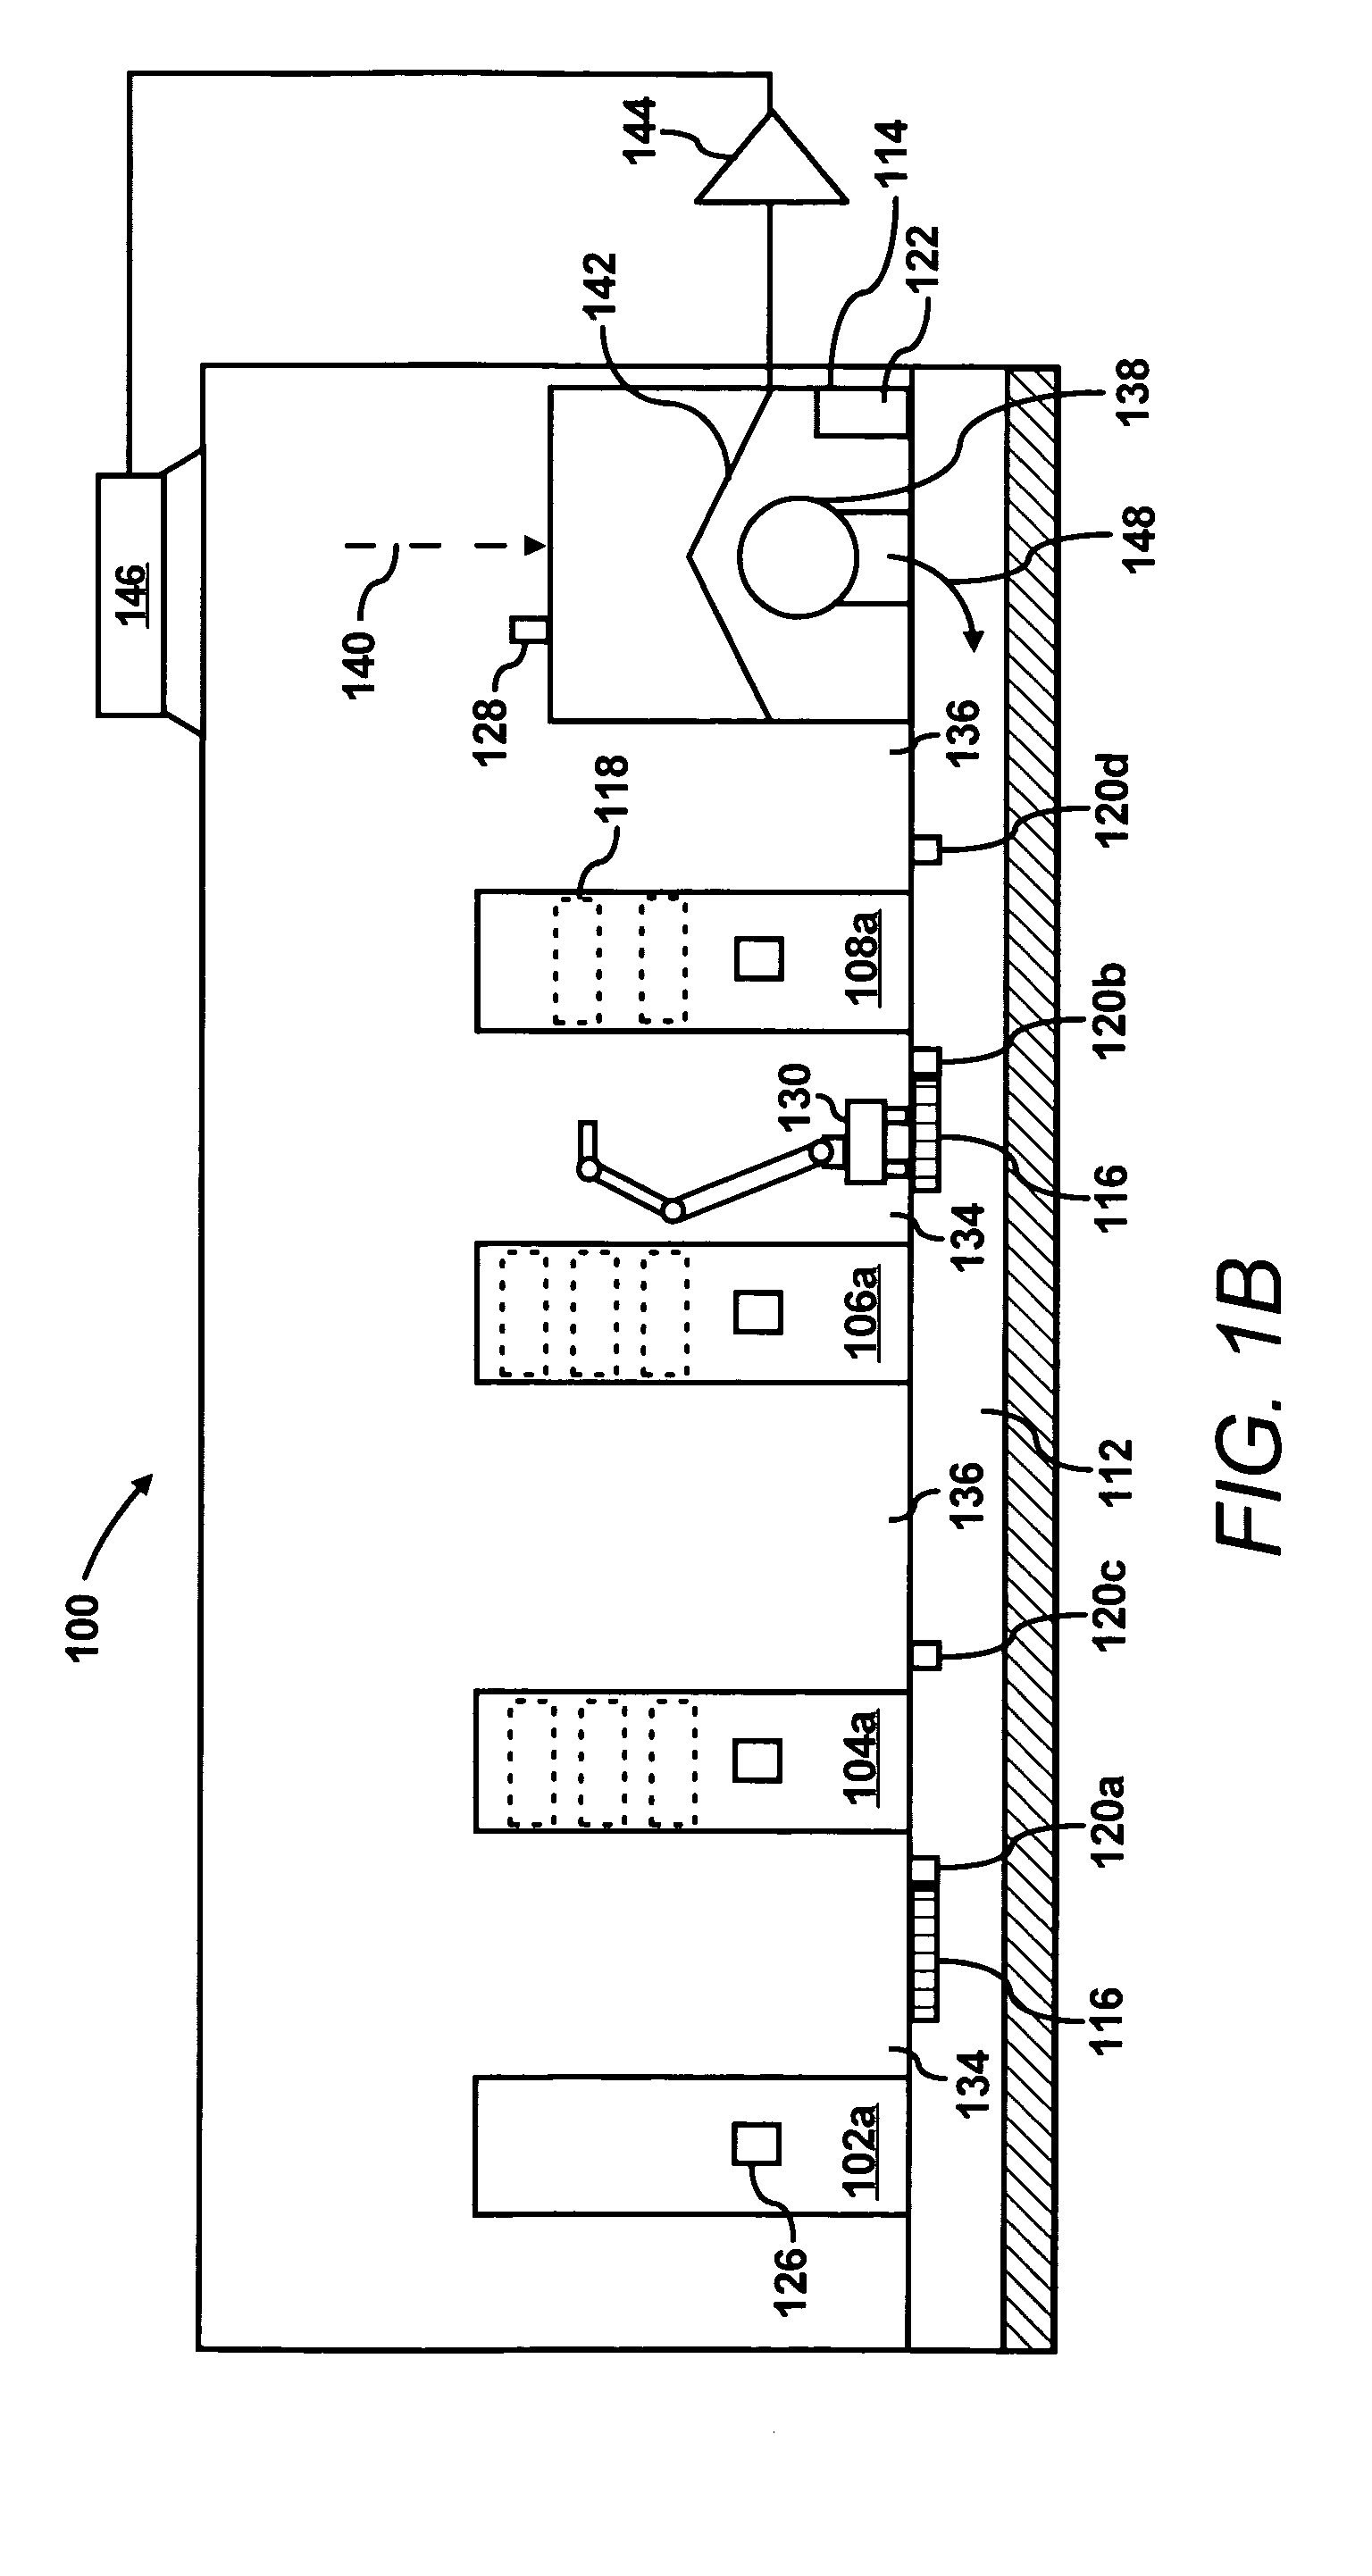 Cooling fluid provisioning with location aware sensors